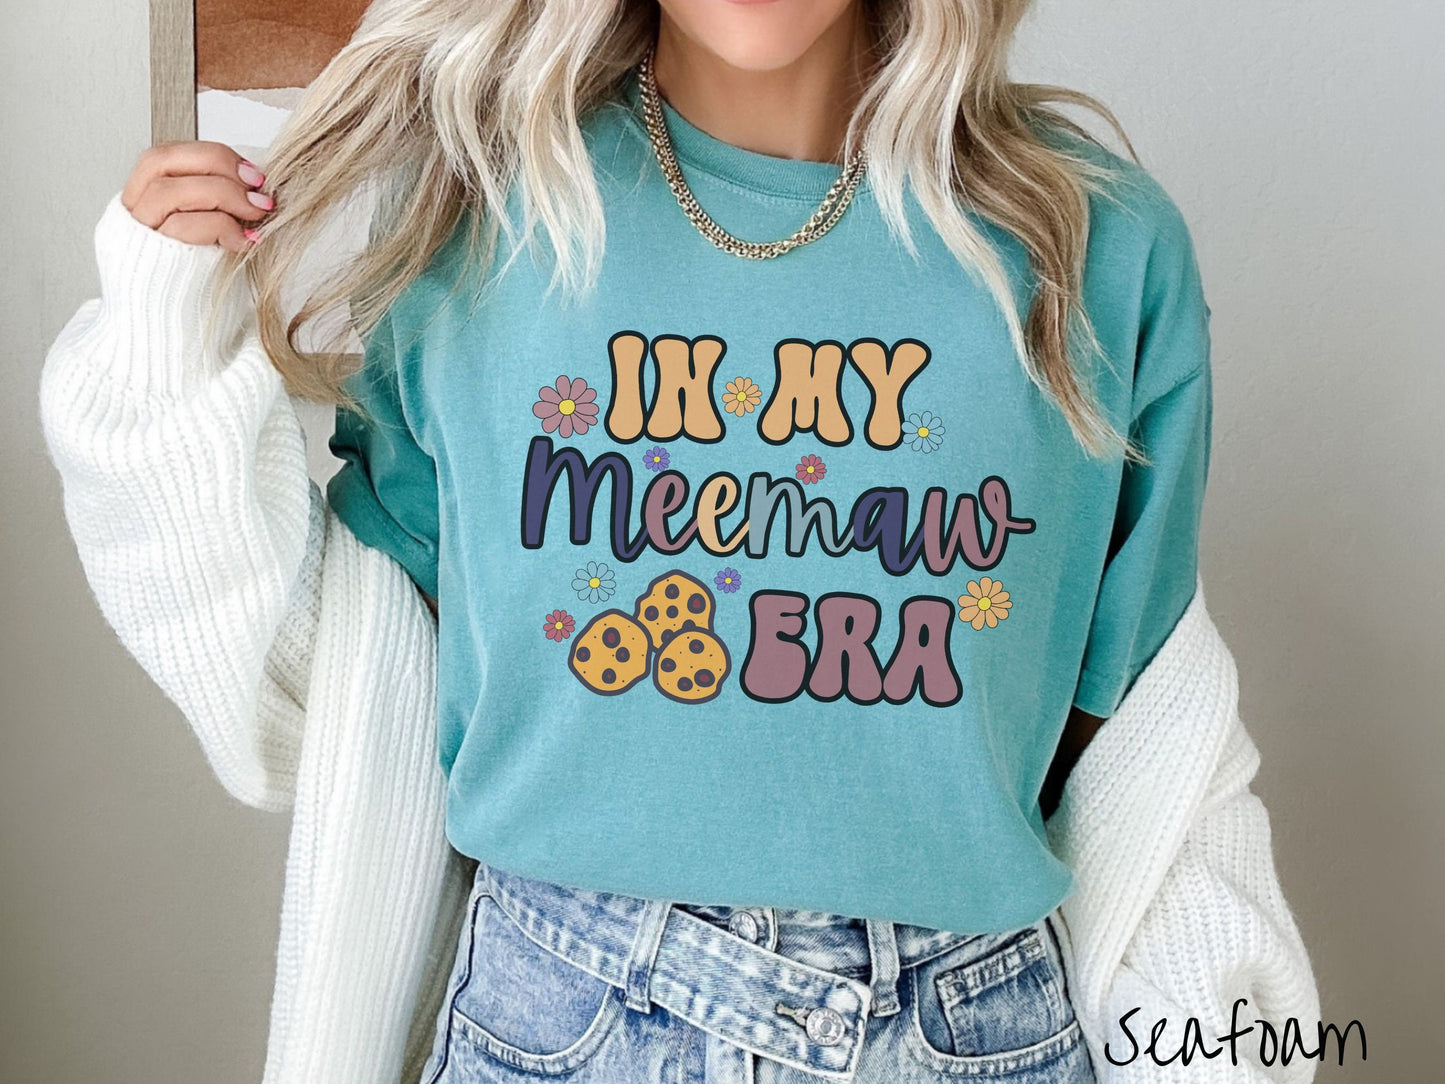 A woman wearing a cute seafoam colored sweatshirt with text on the front saying In My Meemaw Era, with flowers and chocolate chip cookies mixed within the text.